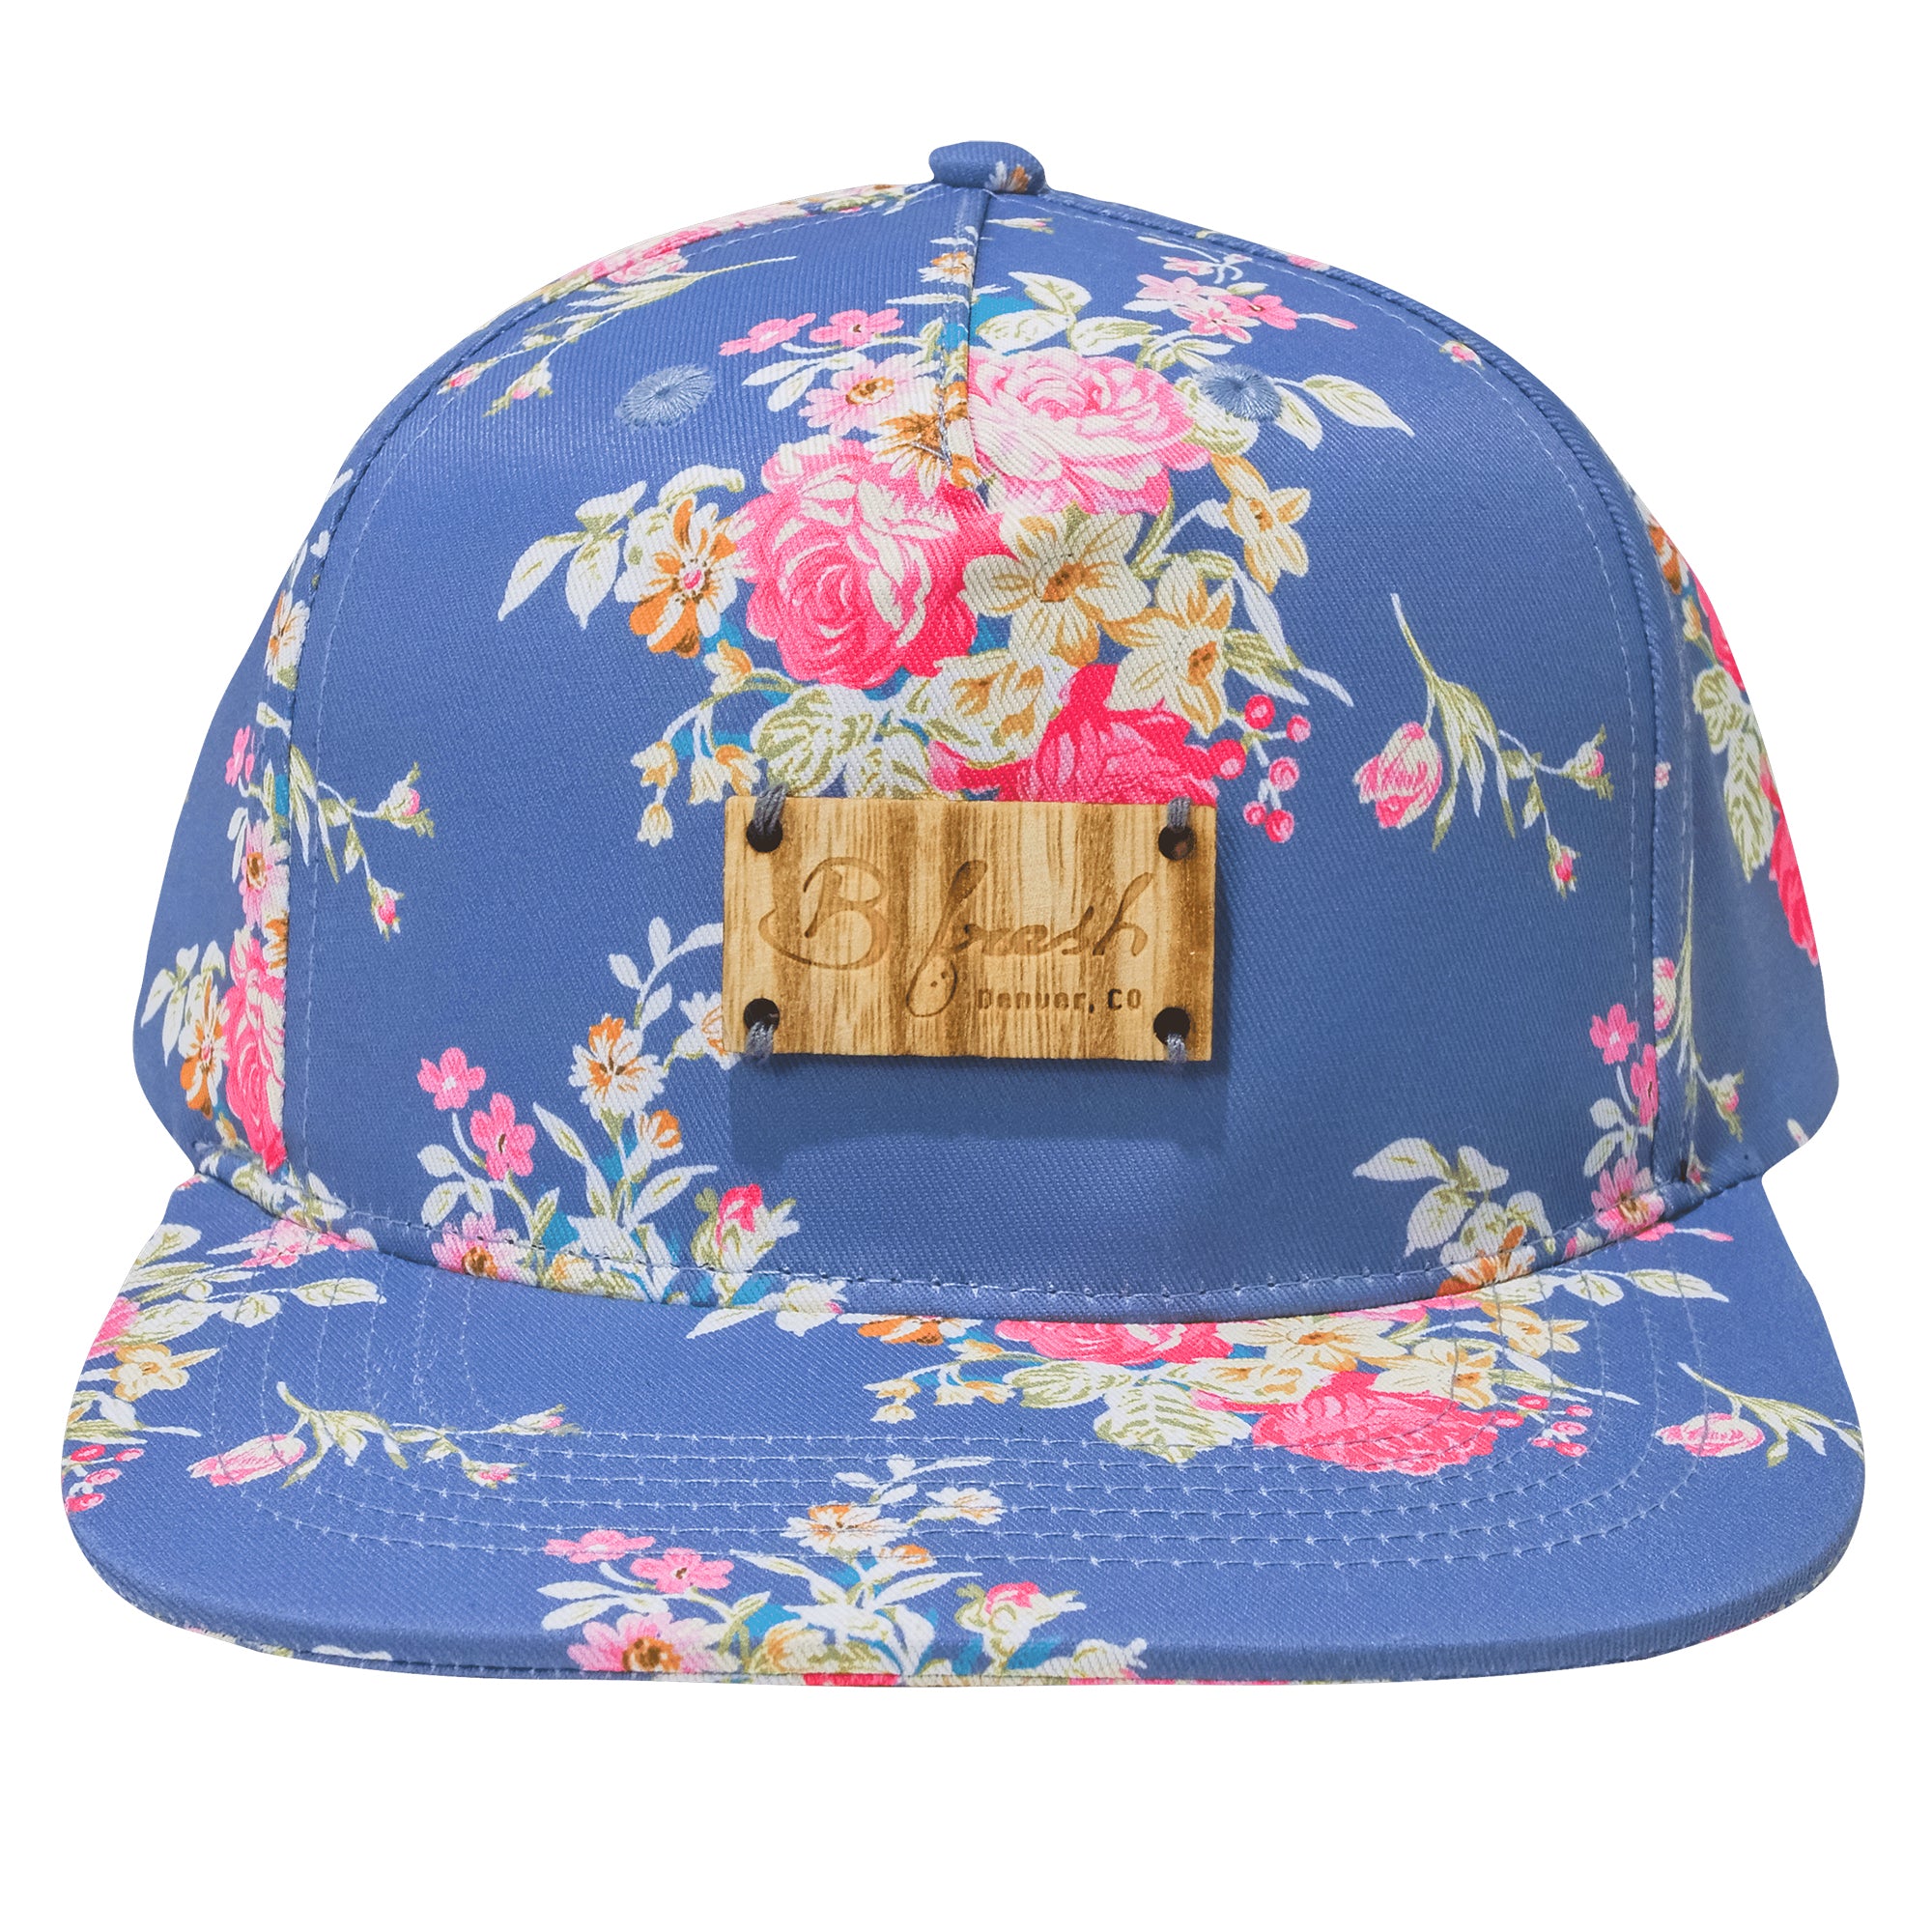 Grandmas Couch Vintage Floral 80s 90s Throwback Retro Hat Wooden Label. B Fresh Gear.